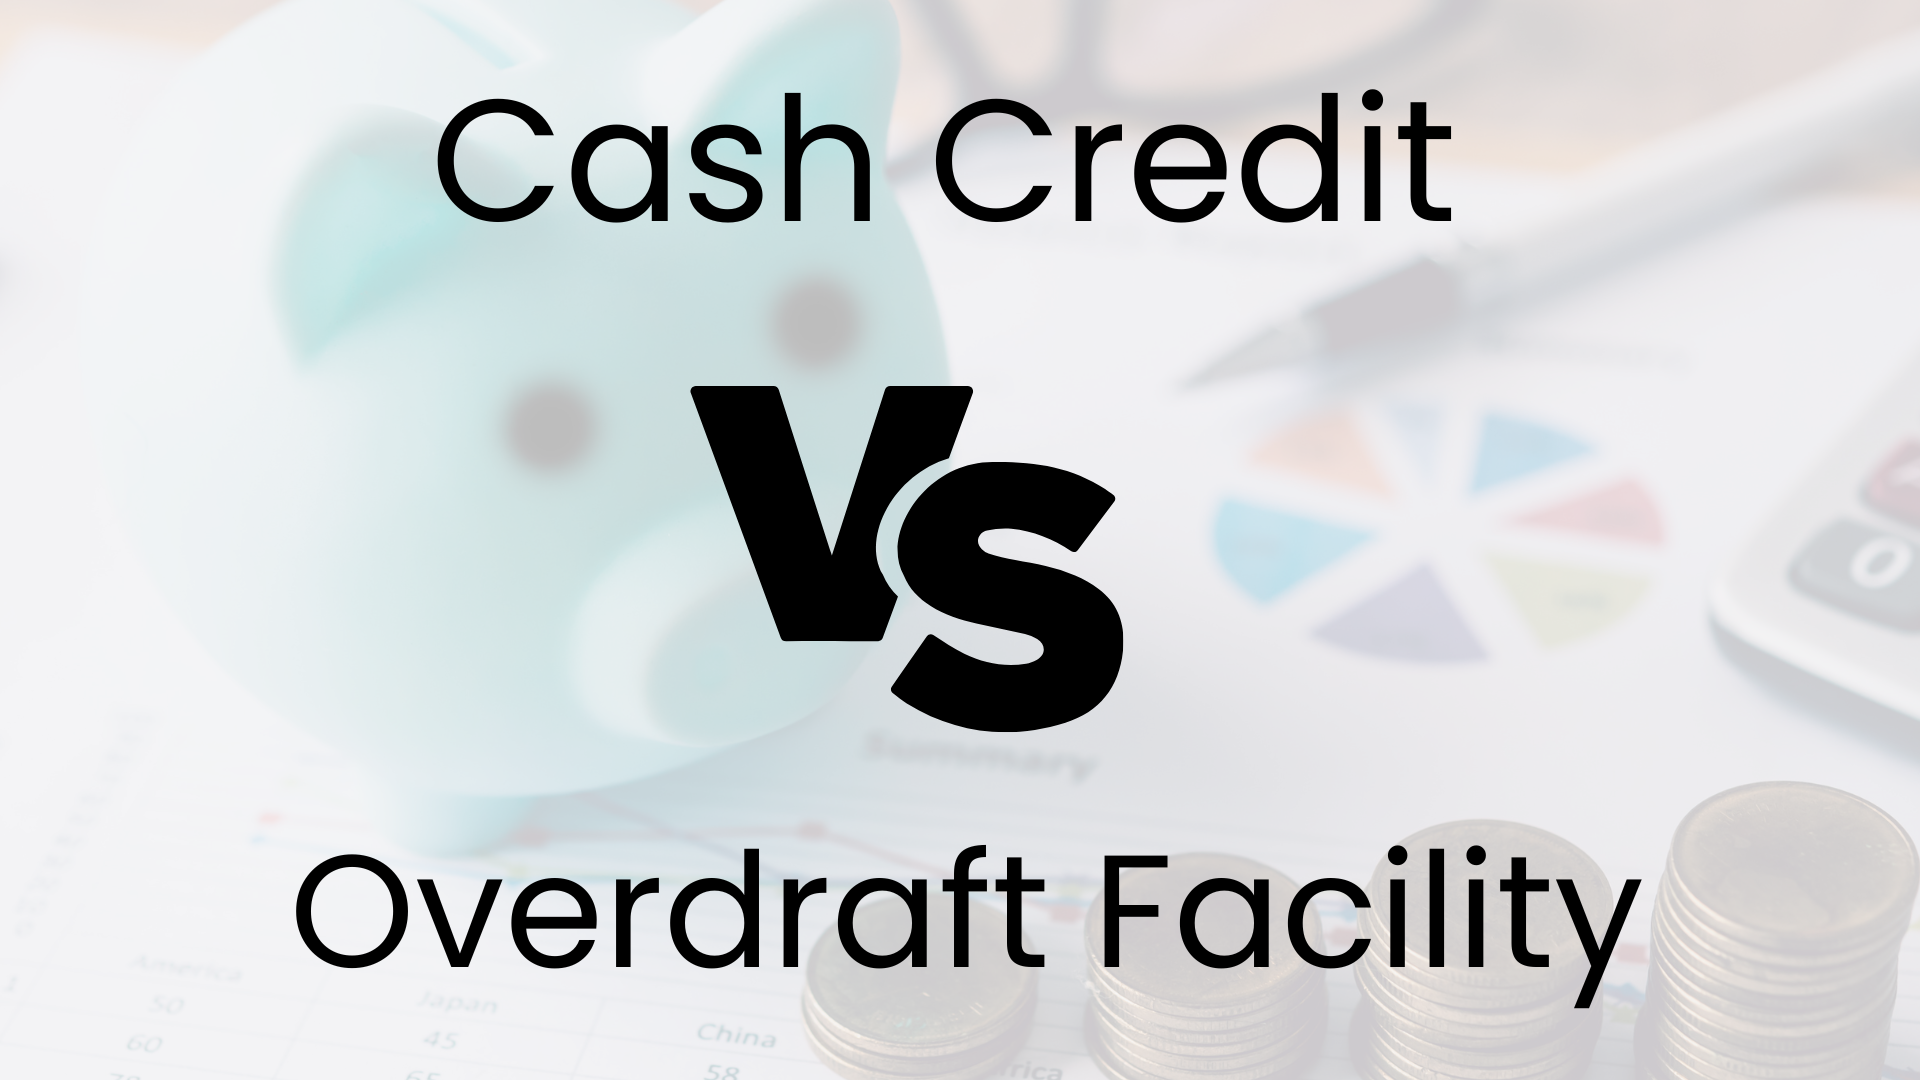 Cash Credit Versus Overdraft Facility: Identify the Key Differences Between the Two!